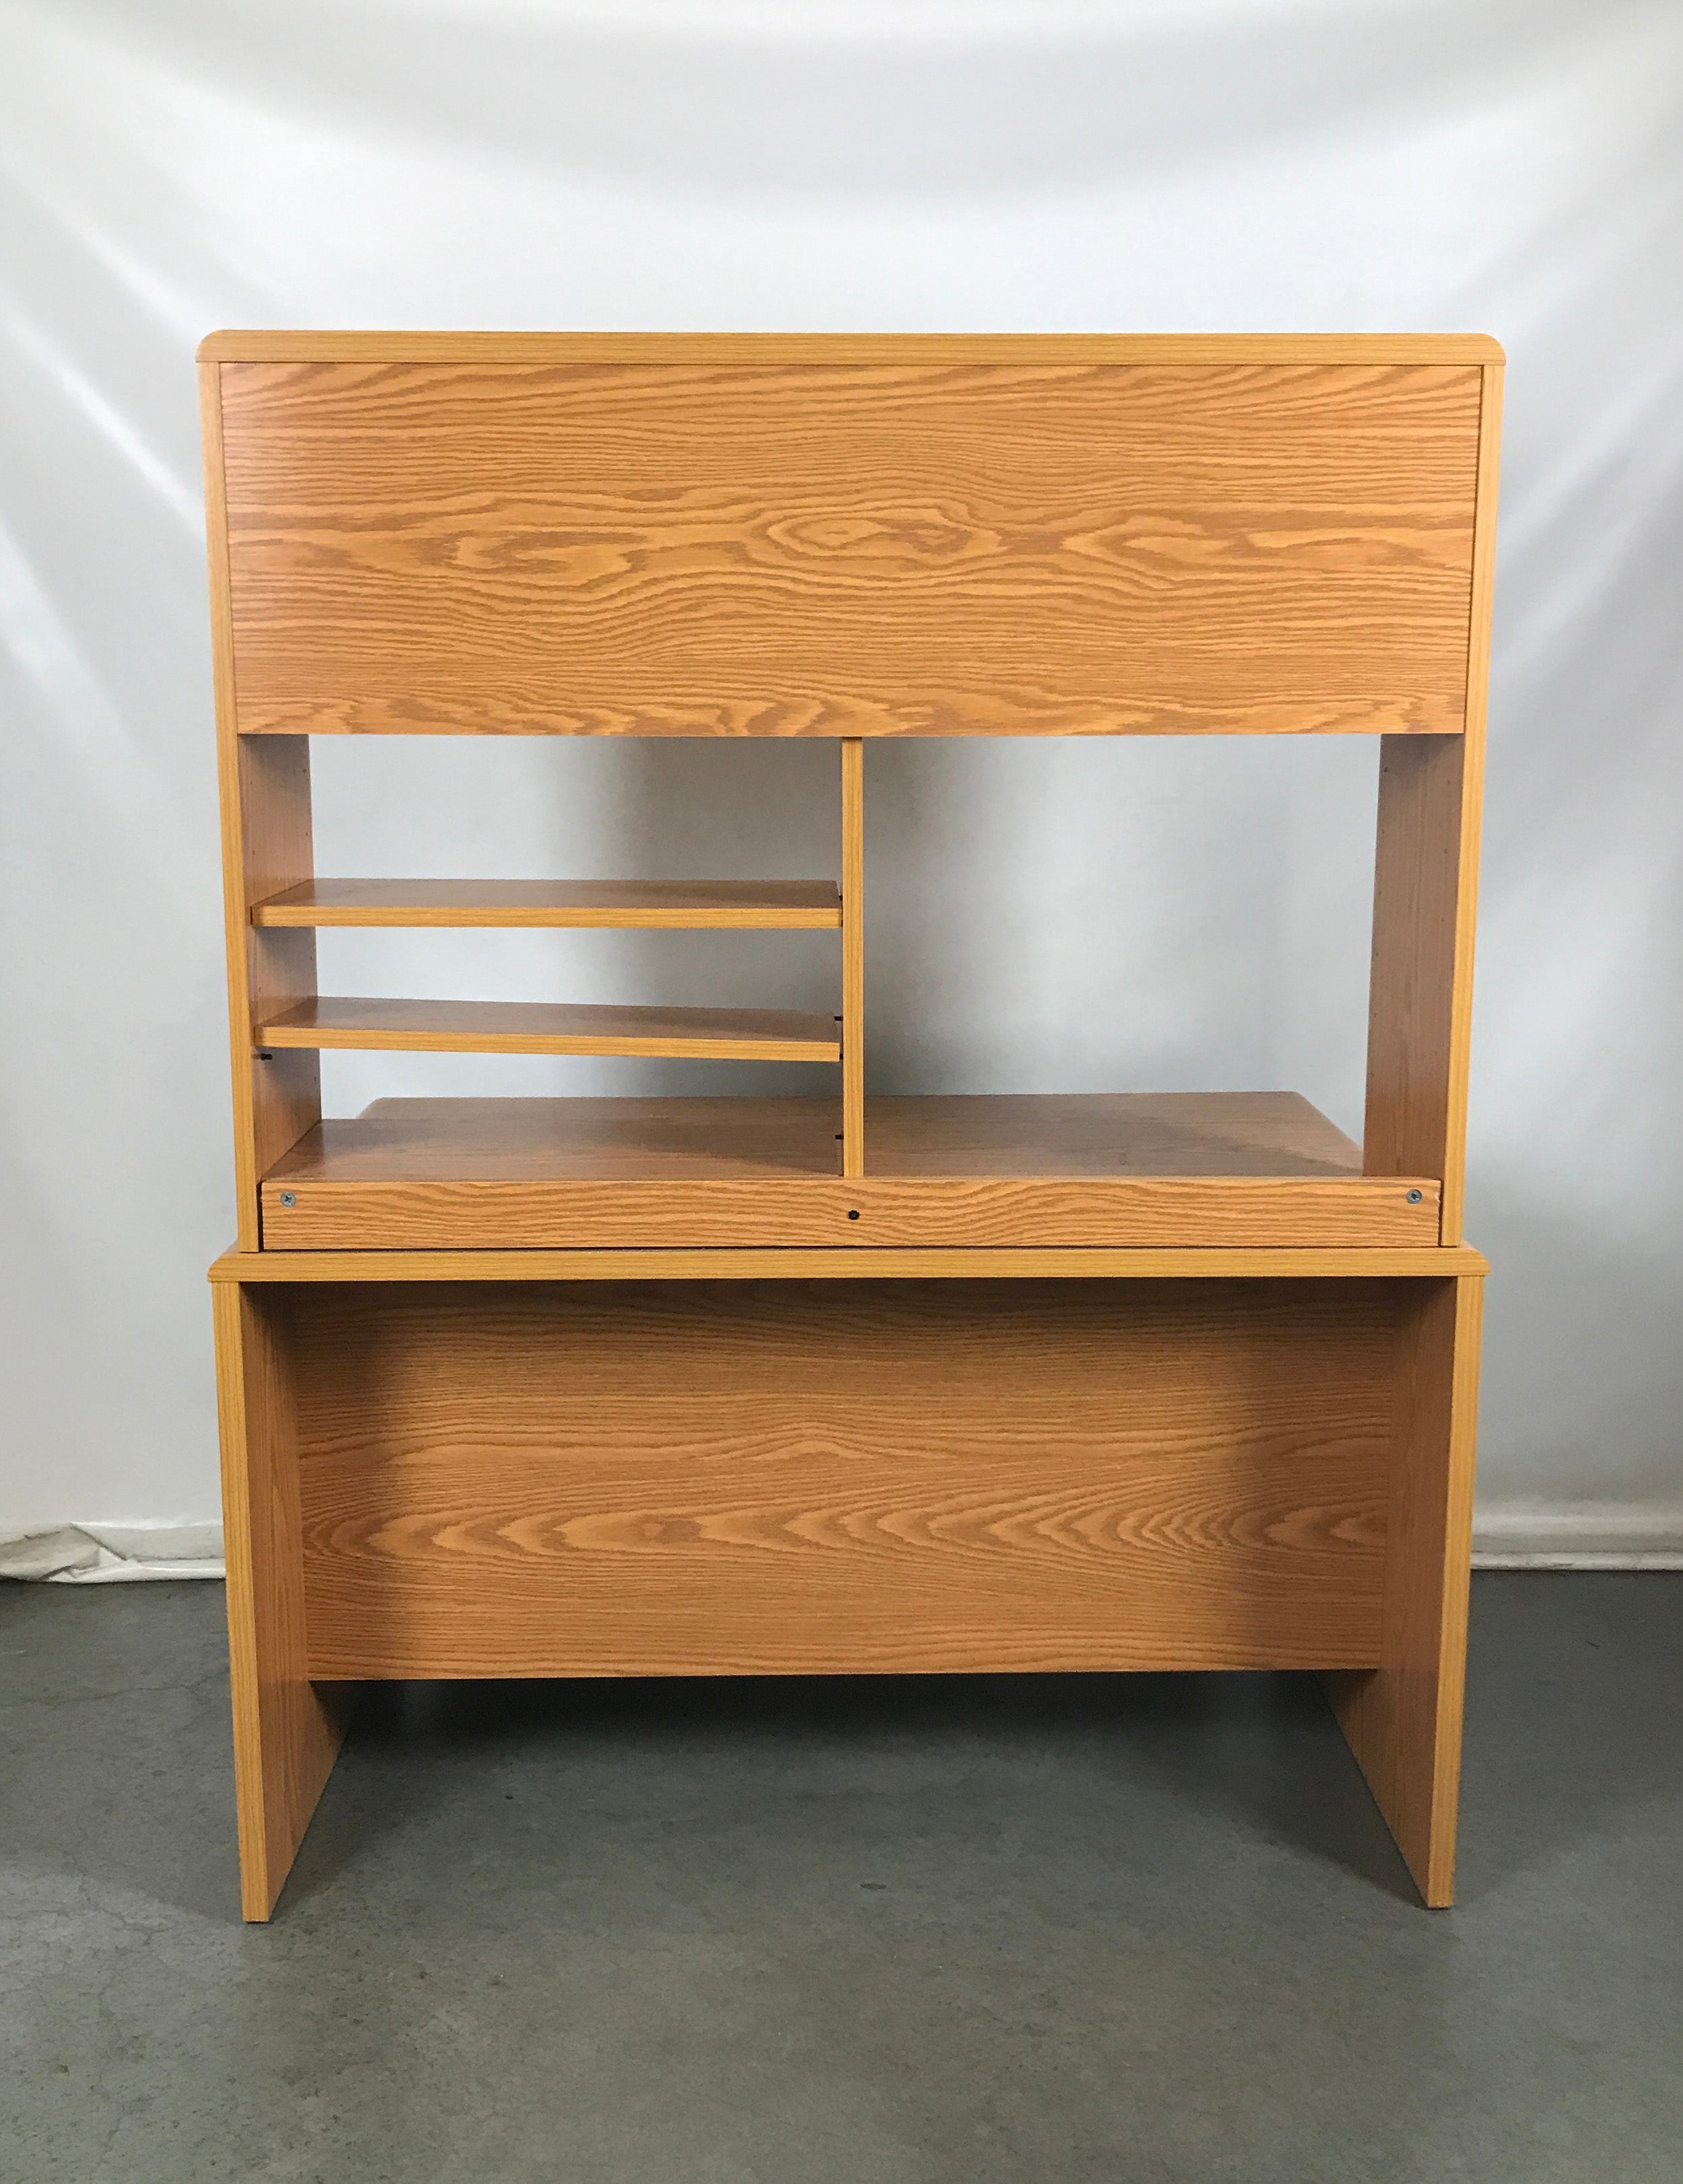 Lorell Wooden Computer Desk with Attached Hutch